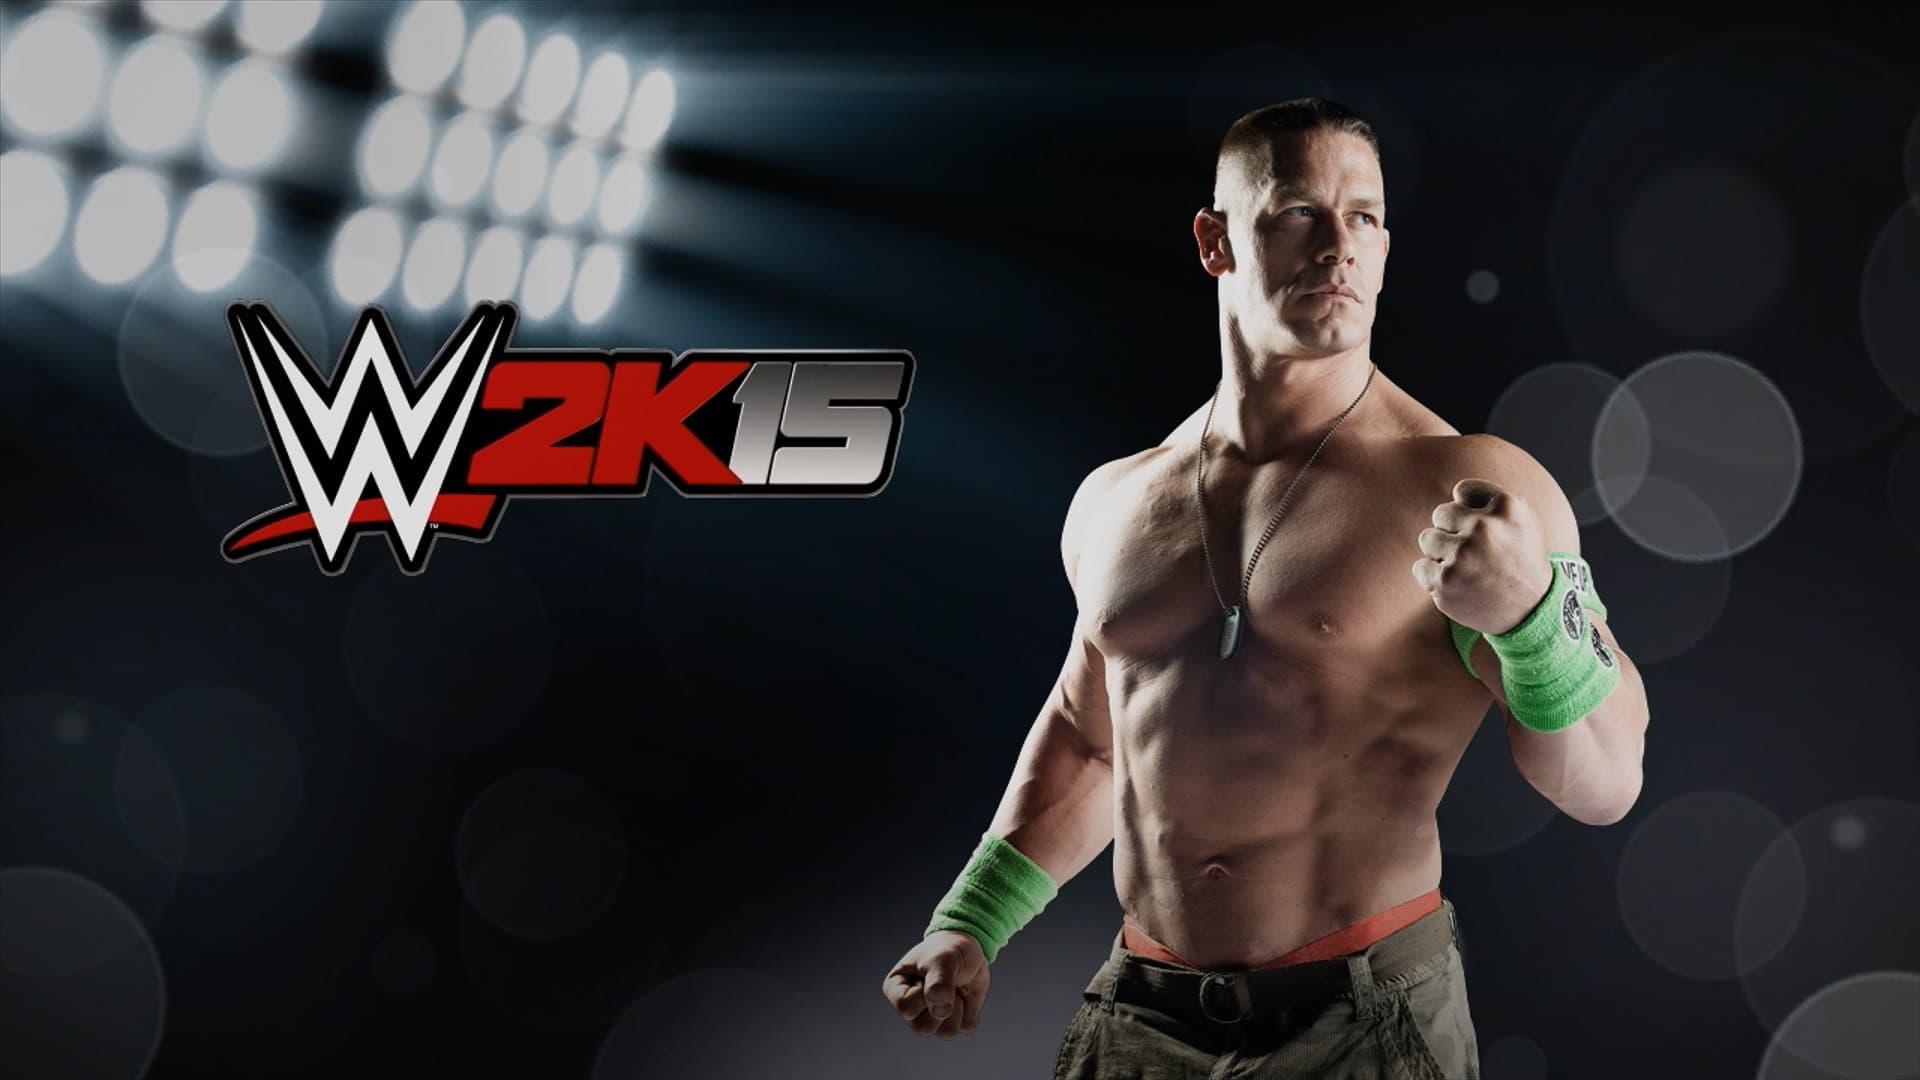 WWE 2k15 Download free for PC